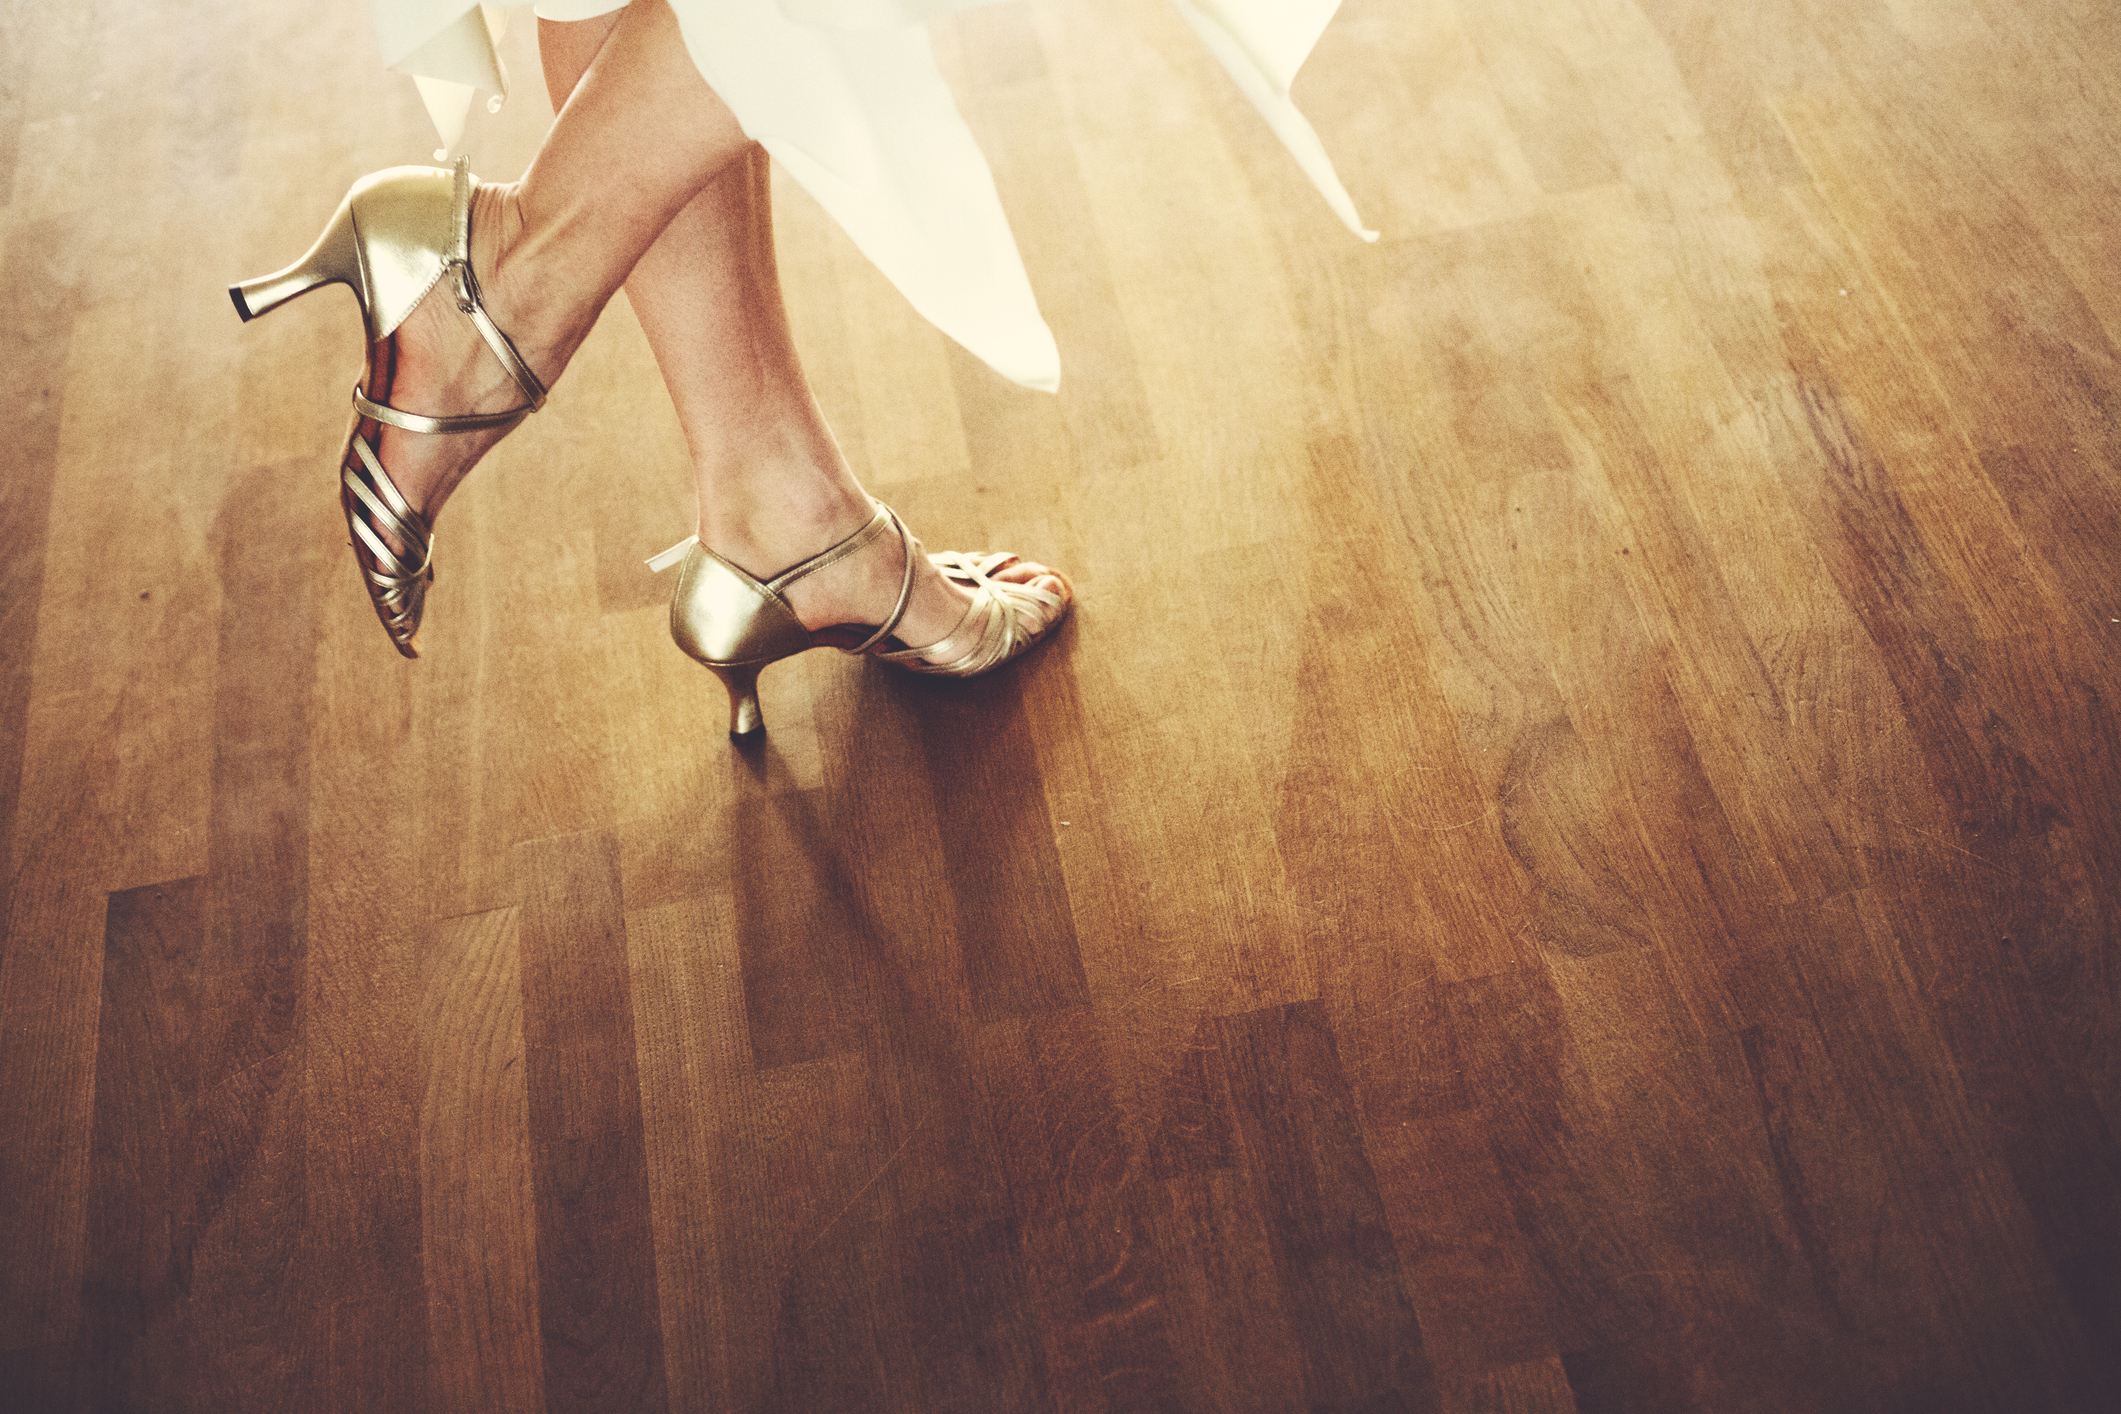 Woman in elegant strappy heels and the hem of a flowing dress, standing poised on a wooden floor